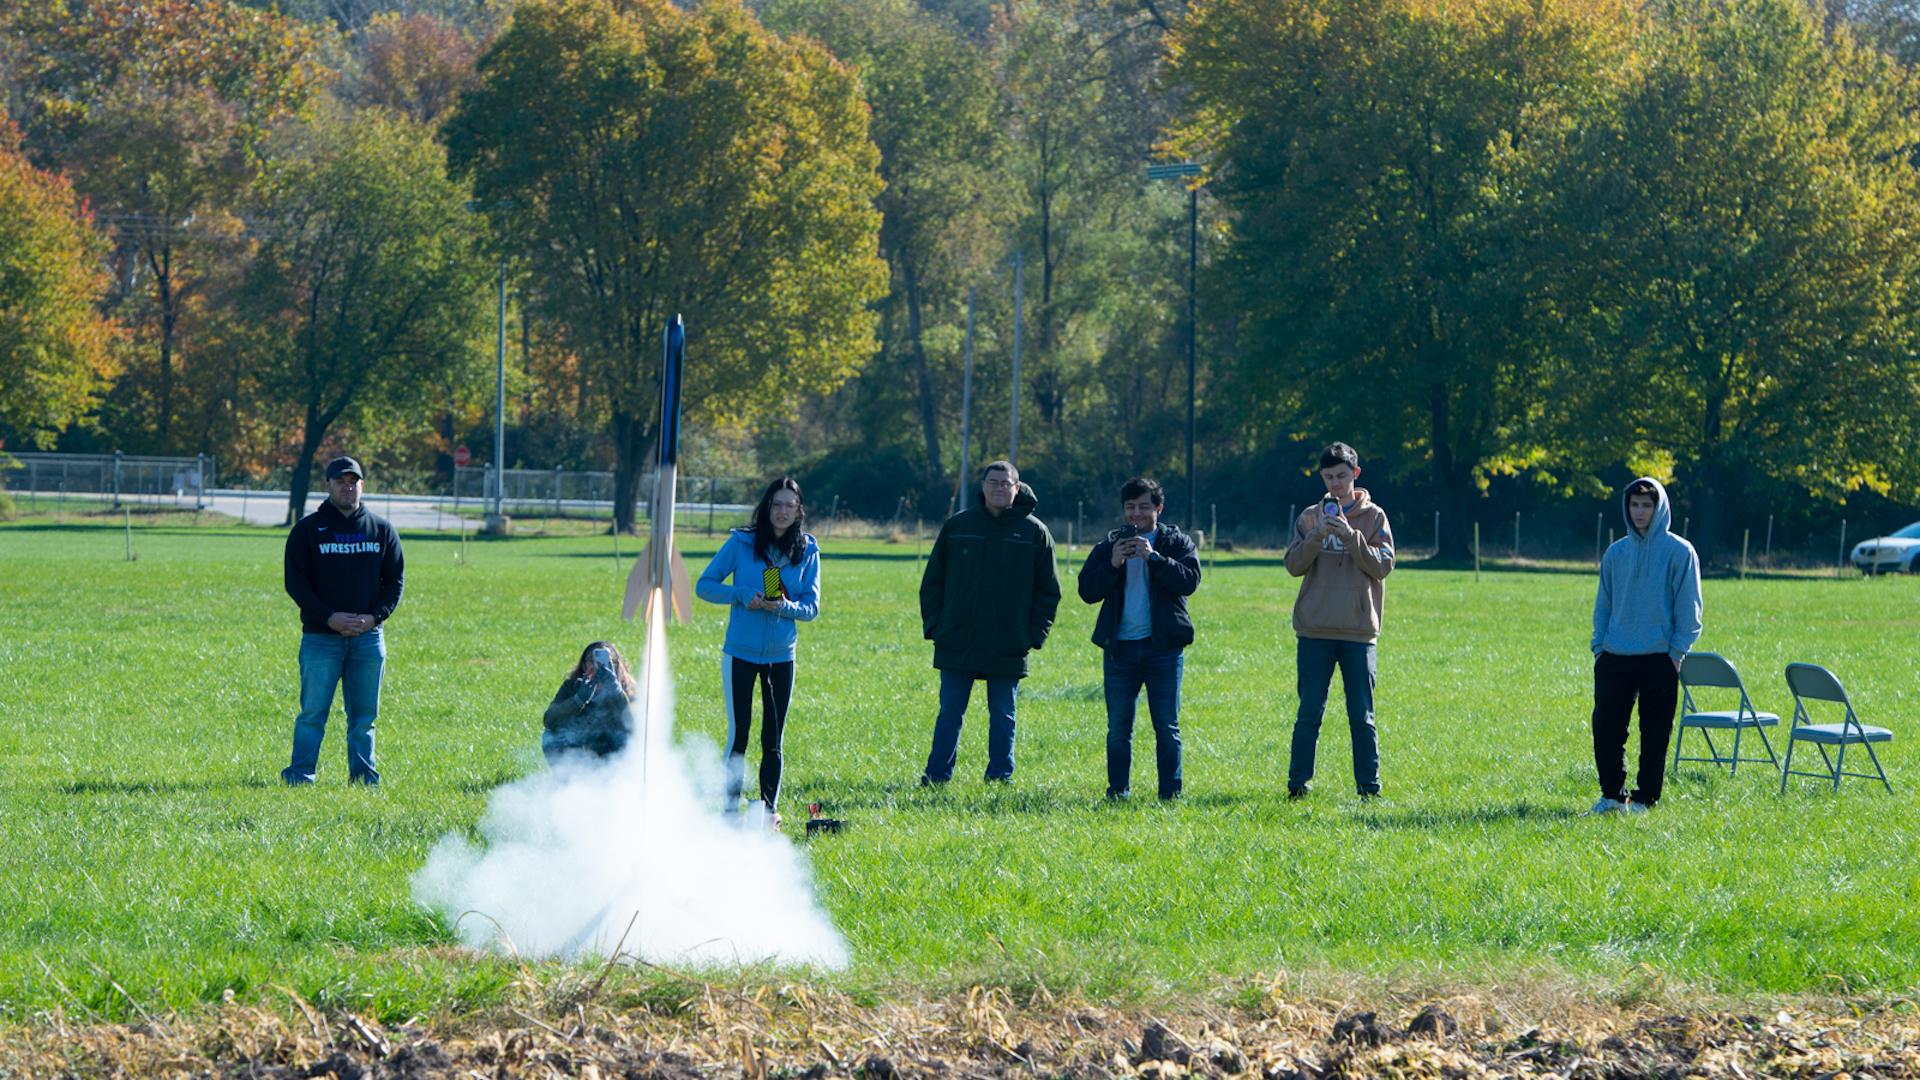 Students at rocket launch